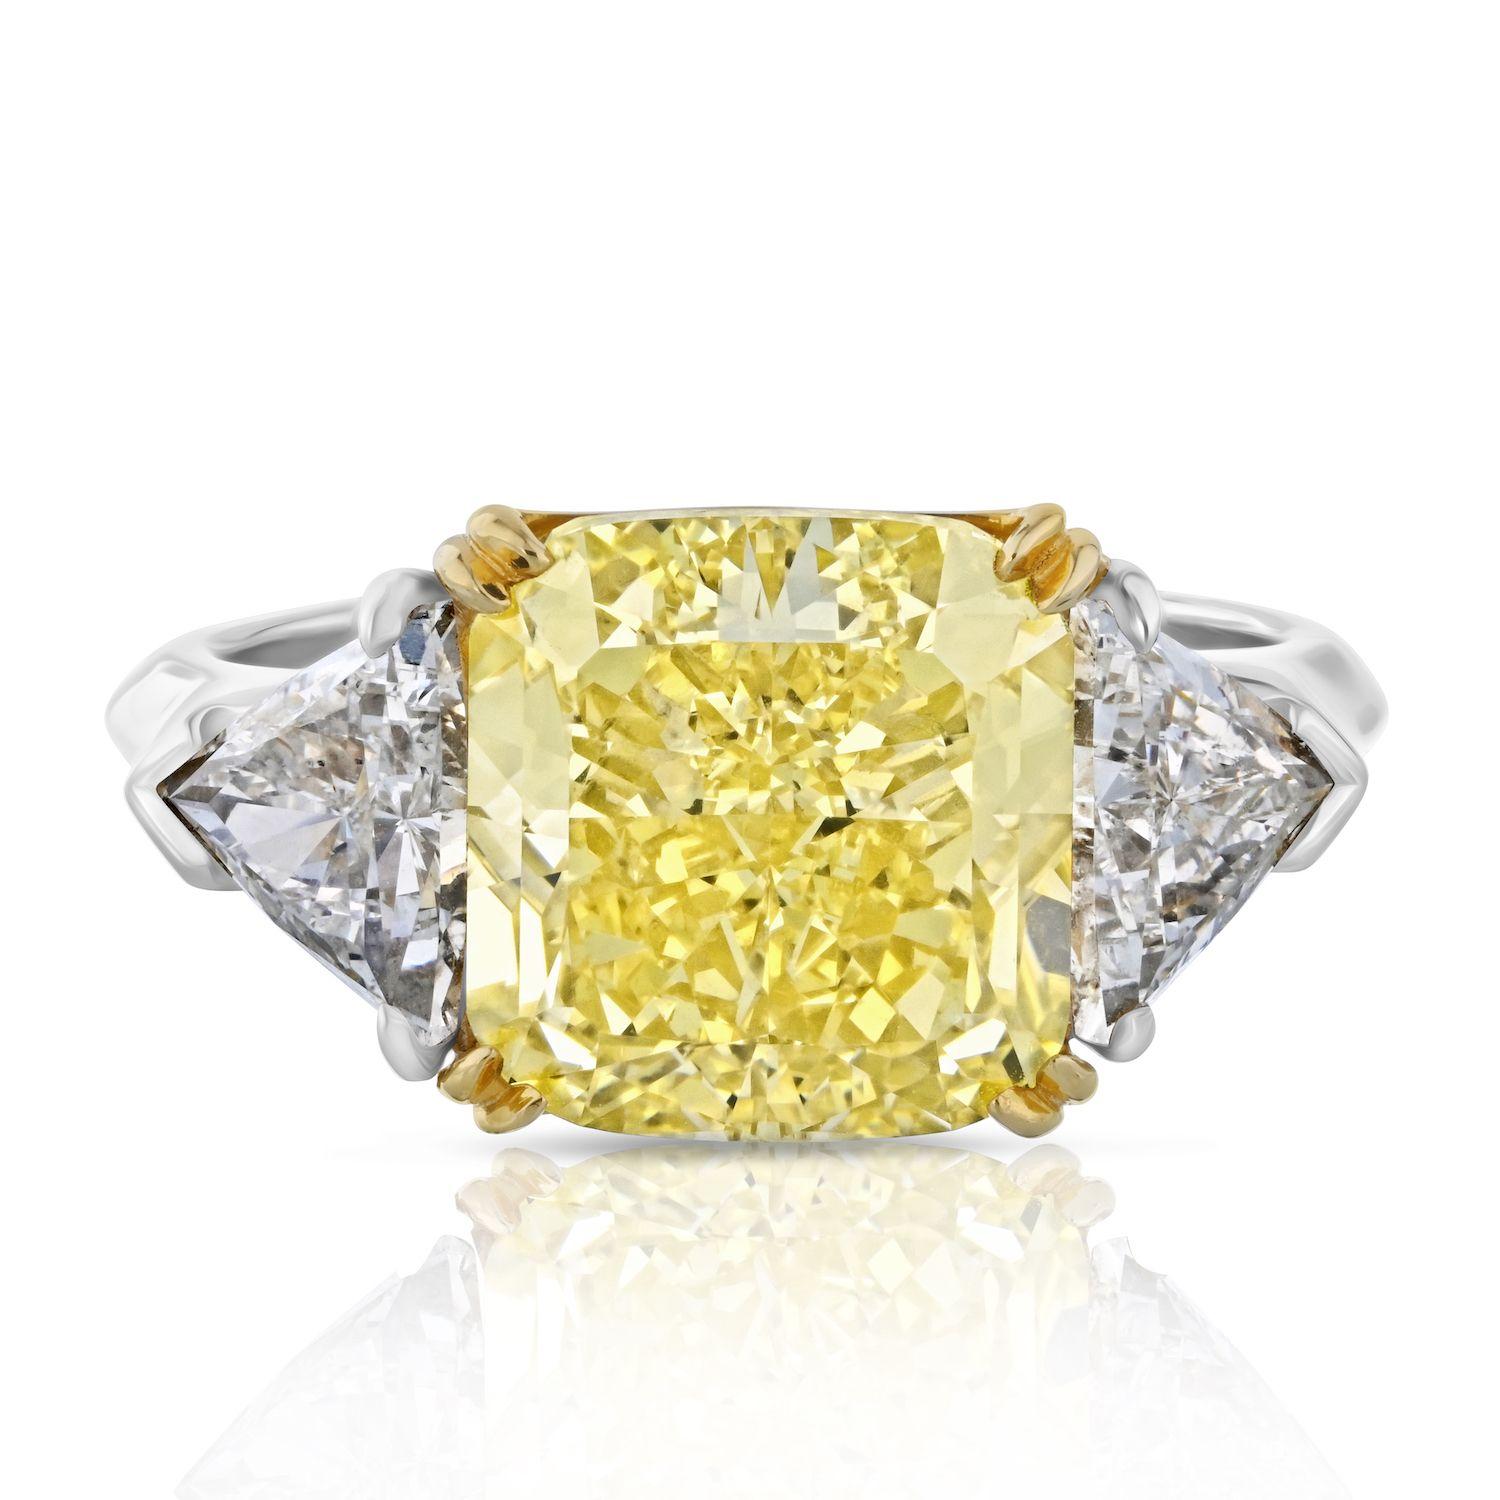 This is a beautiful square radiant cut diamond engagement ring mounted in a handmade setting. The center diamond is a 5.59 Carat Fancy Vivid Yellow Diamond, extremely rare and special. When searching for a fancy yellow diamond one of the main